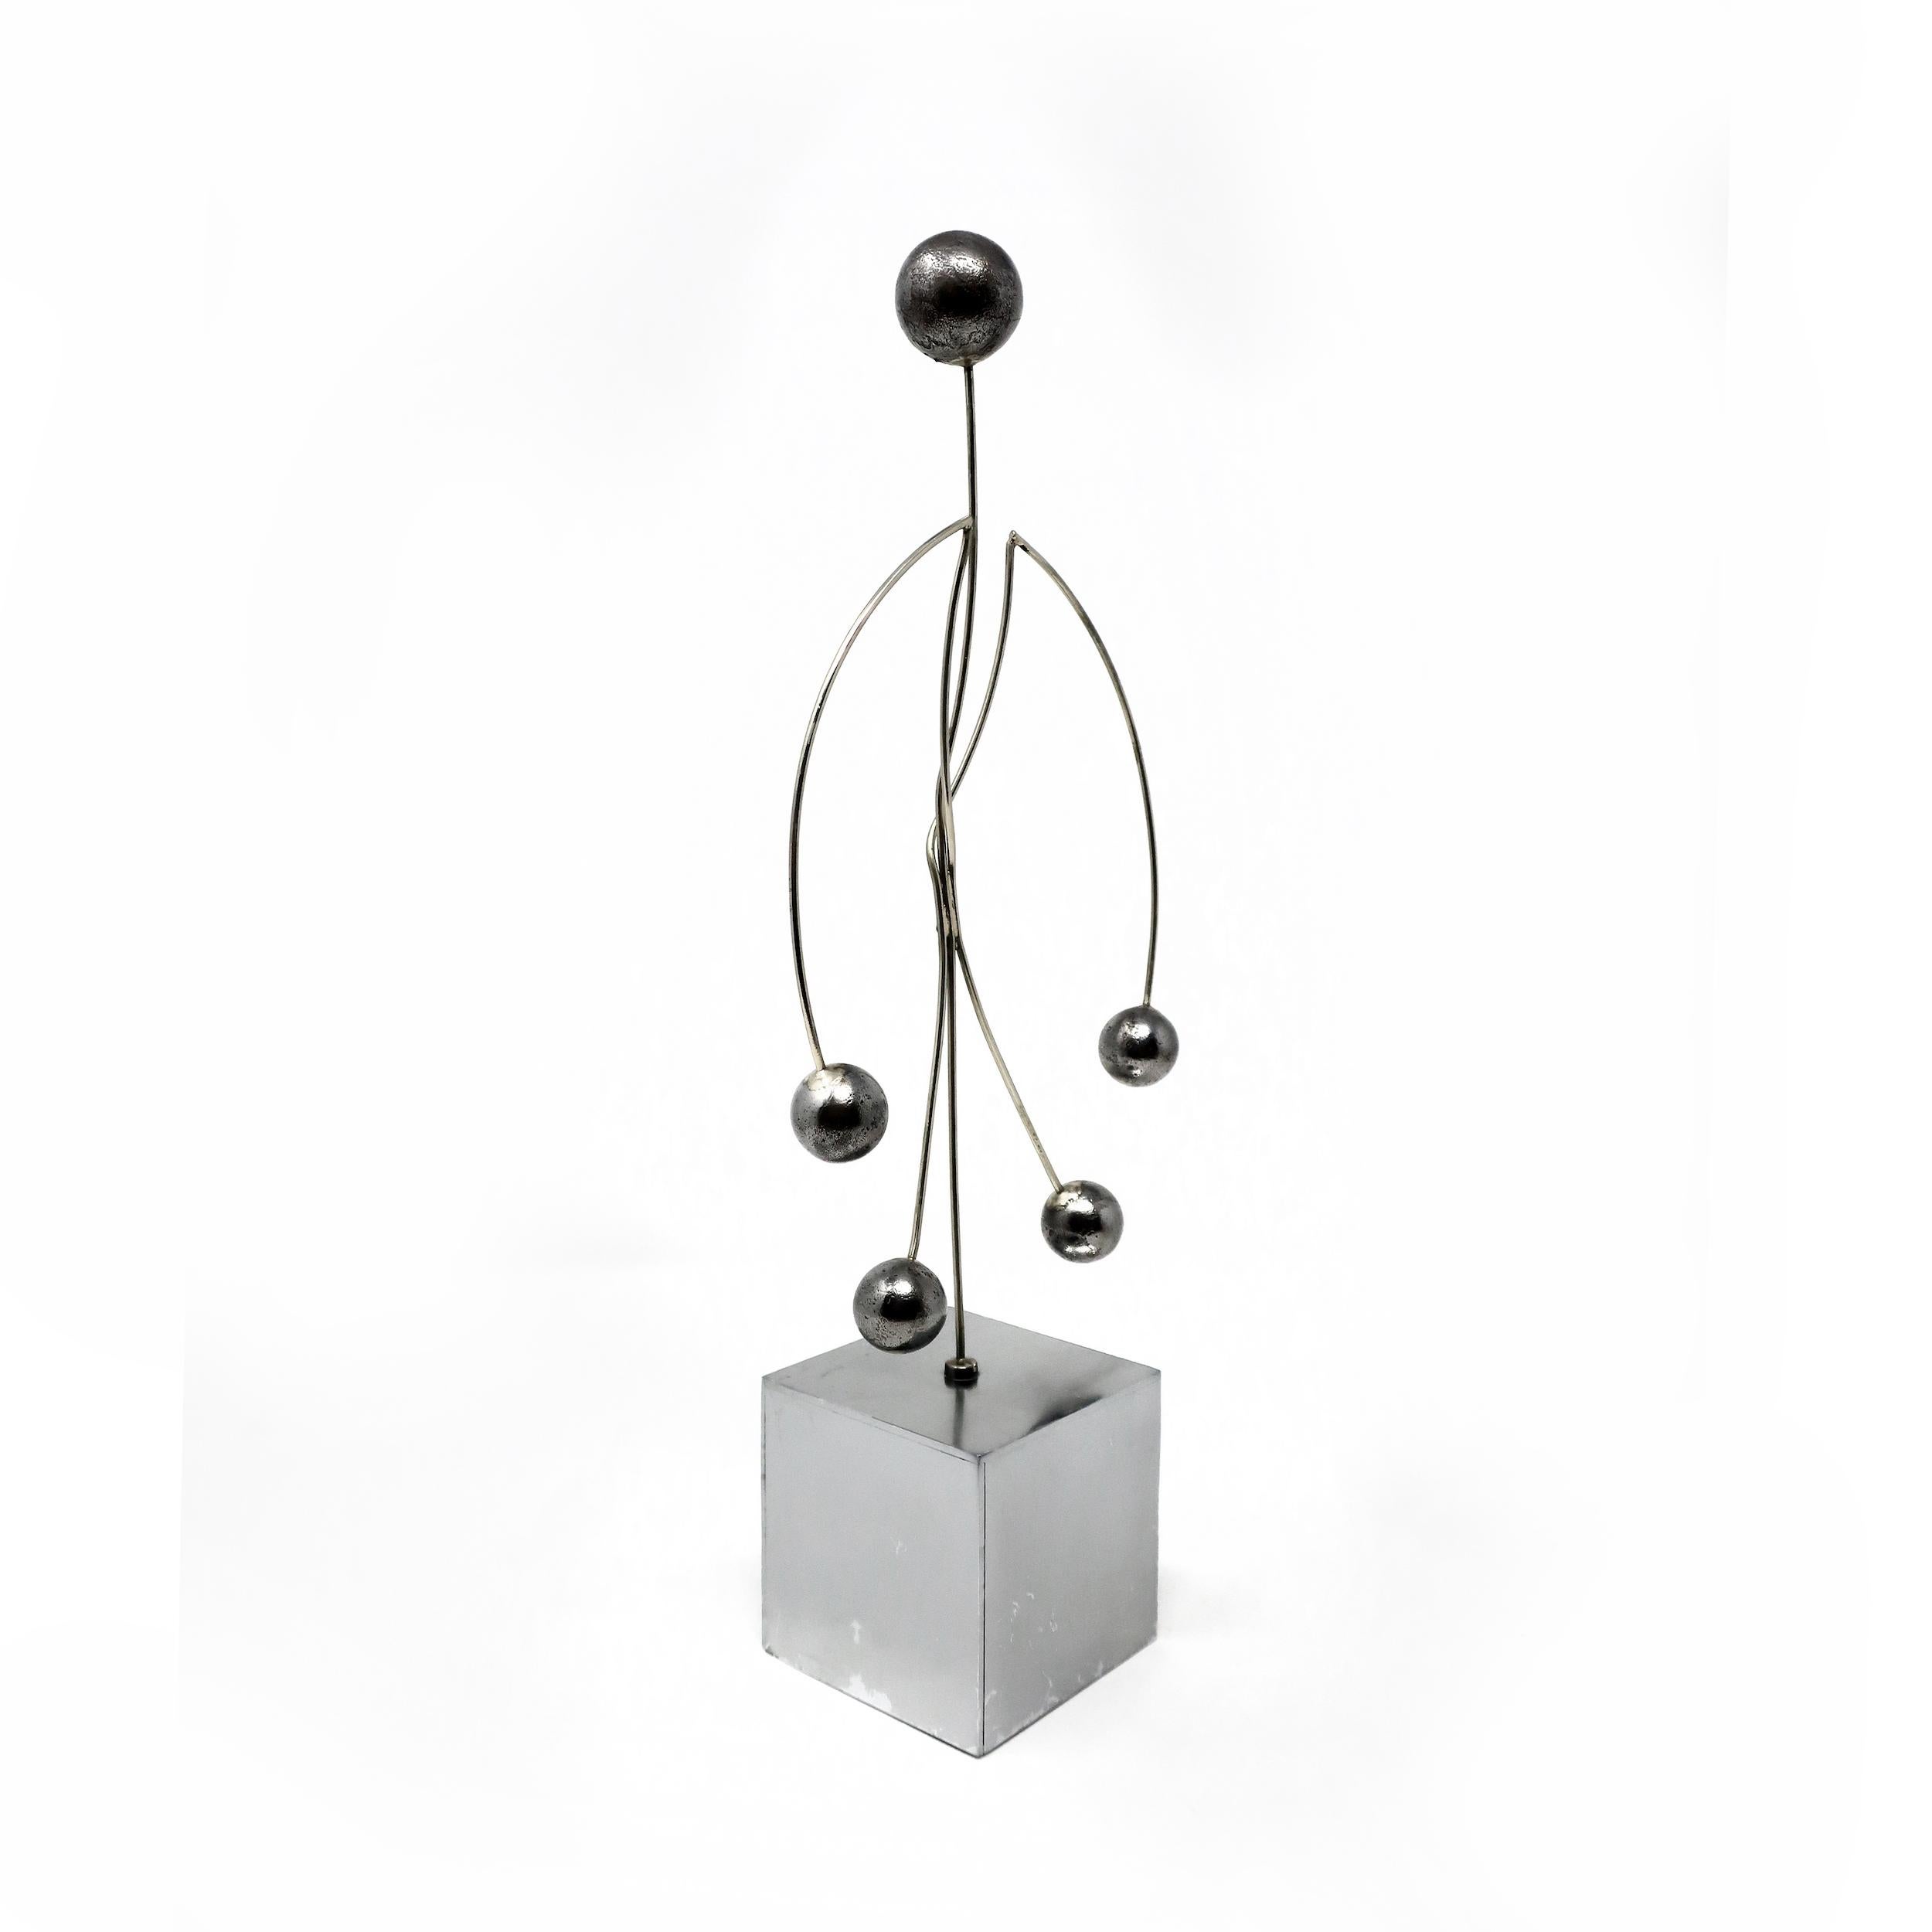 A vintage metal kinetic sculpture in the figure of a human body. Set on a weighted chrome base with a figure constructed from heavy gauge metal wire with weighted metal balls for hands, feet, and head. The weight of the limps and head give this